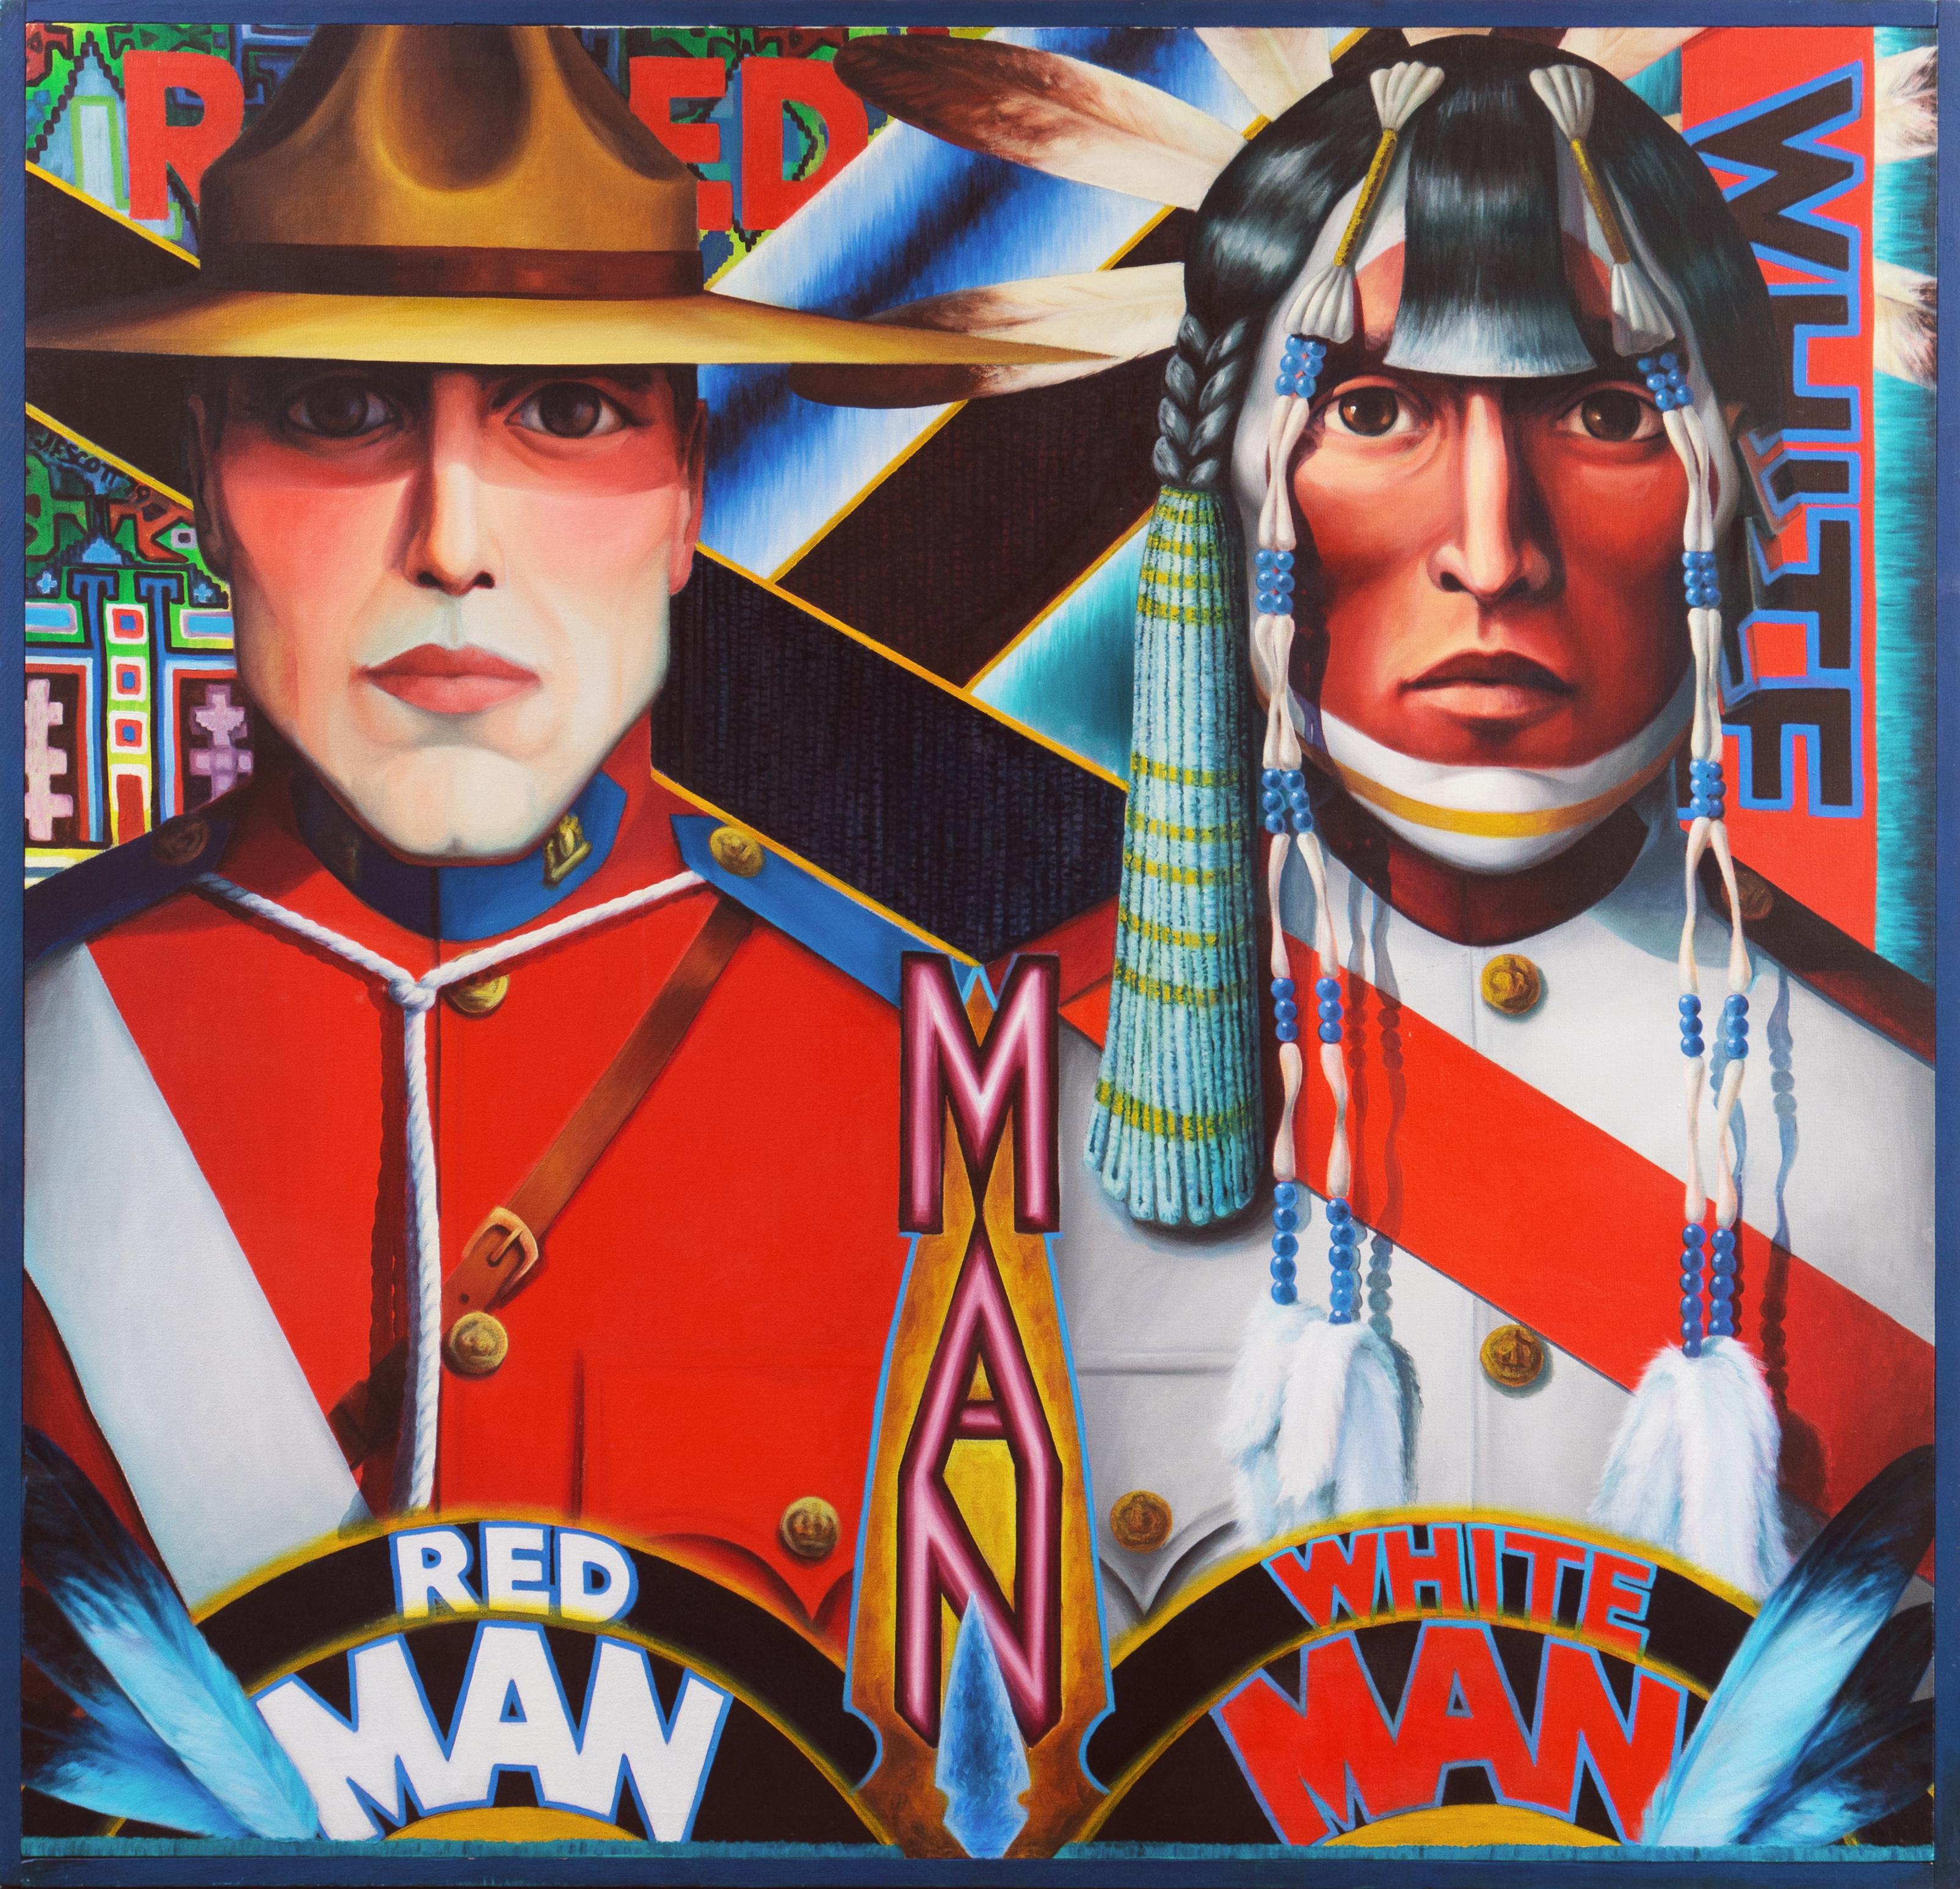 James Scott Figurative Painting - 'Red Man/White Man', Large Pop Art Figural, First Nation, Native American, RCMP